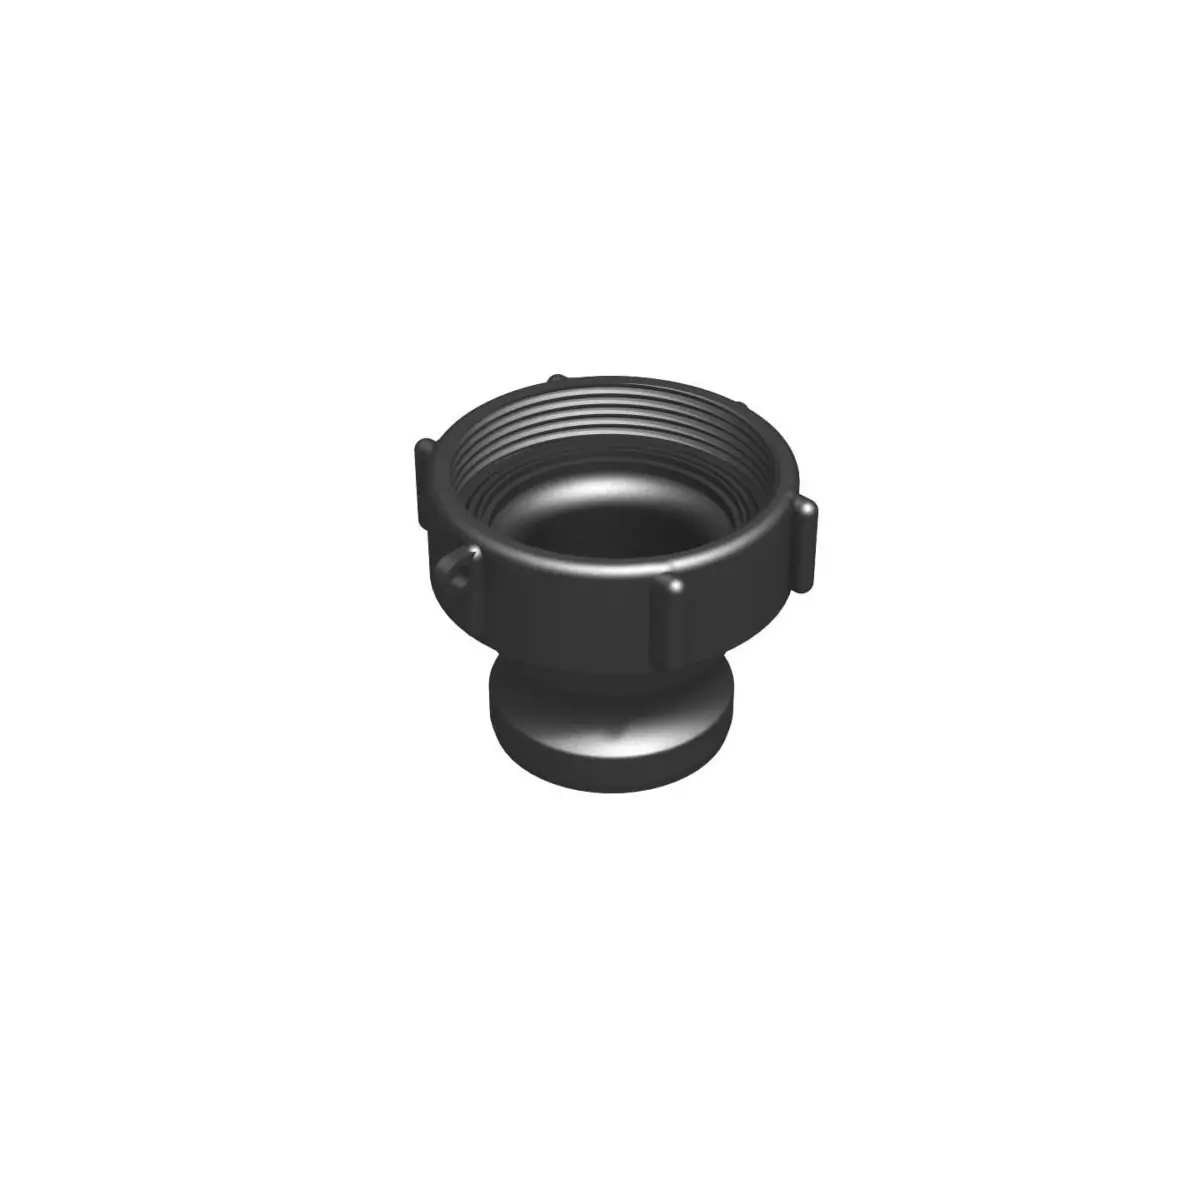 Female coupling M80x3 - male camlock 2 inches